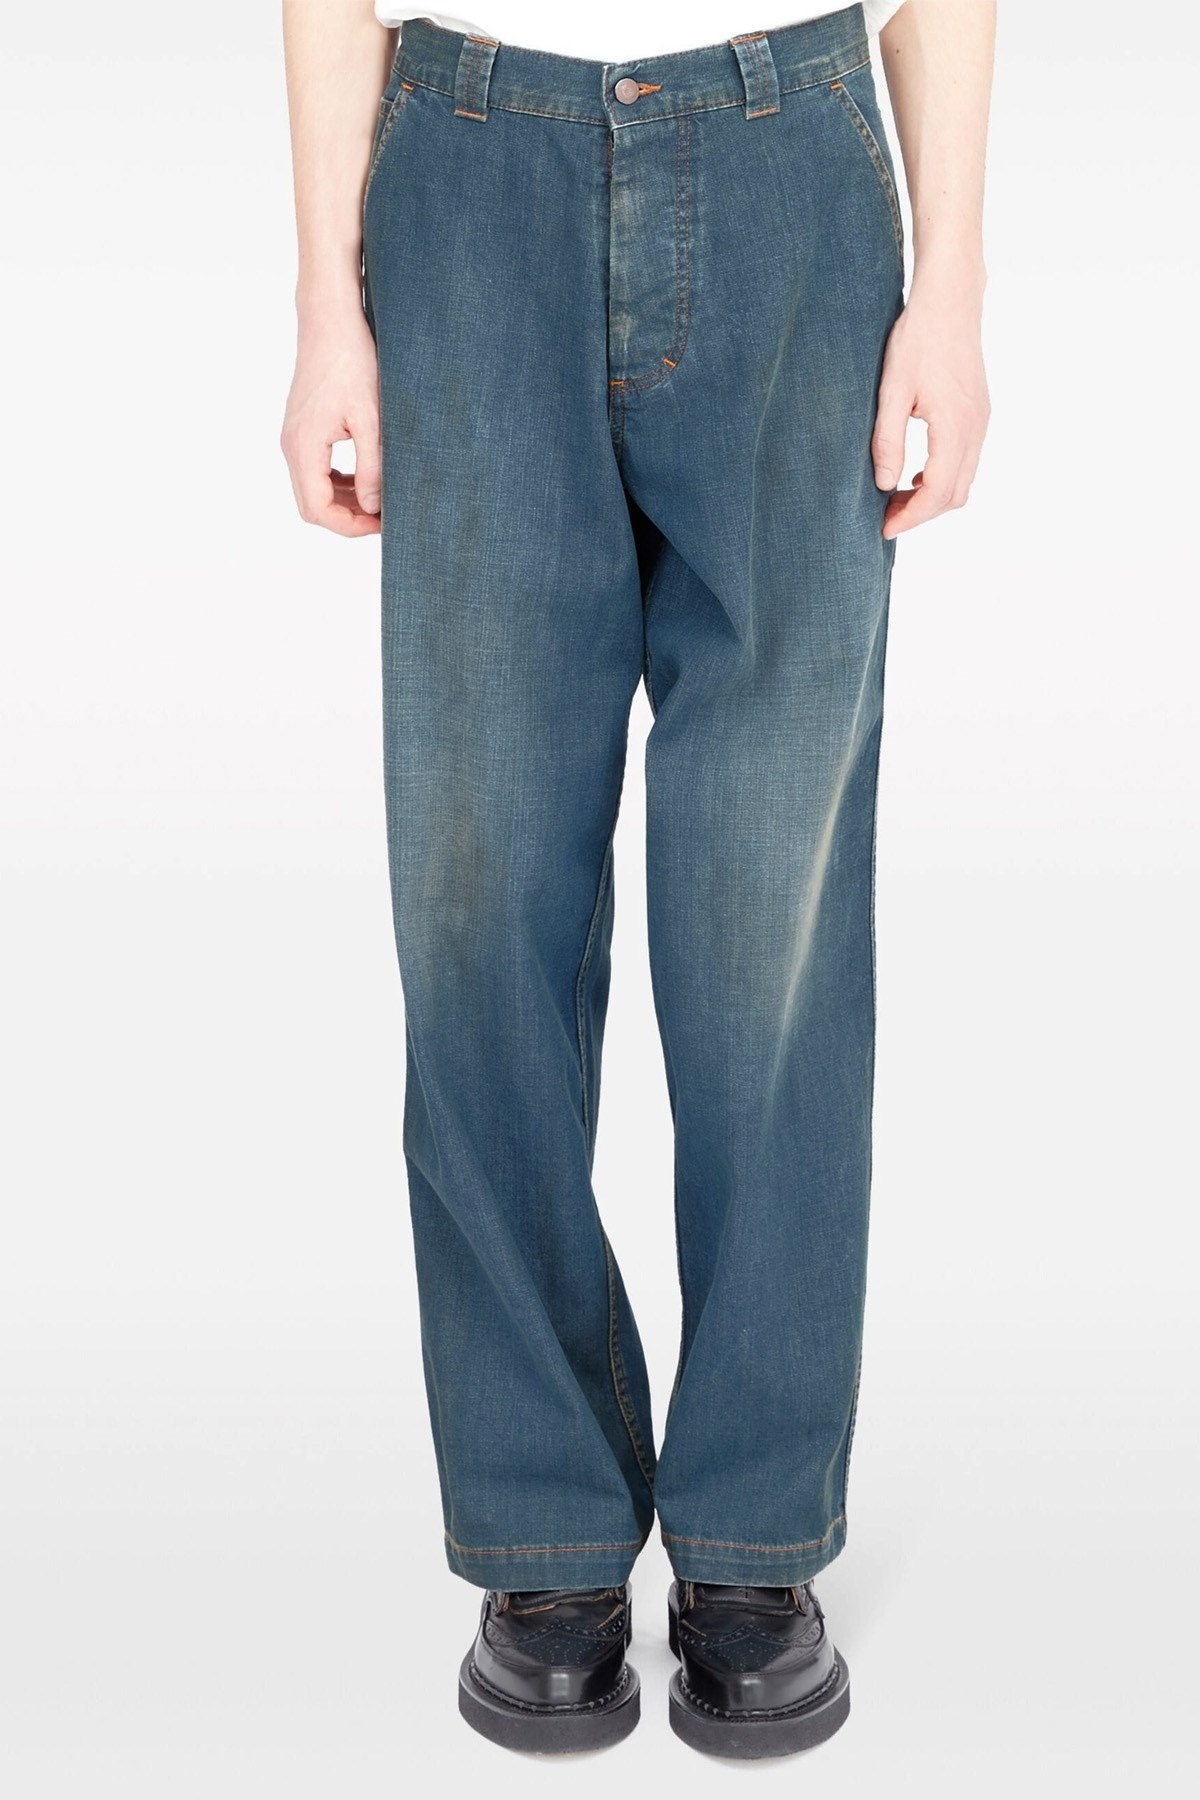 'American wash' jeans - 2